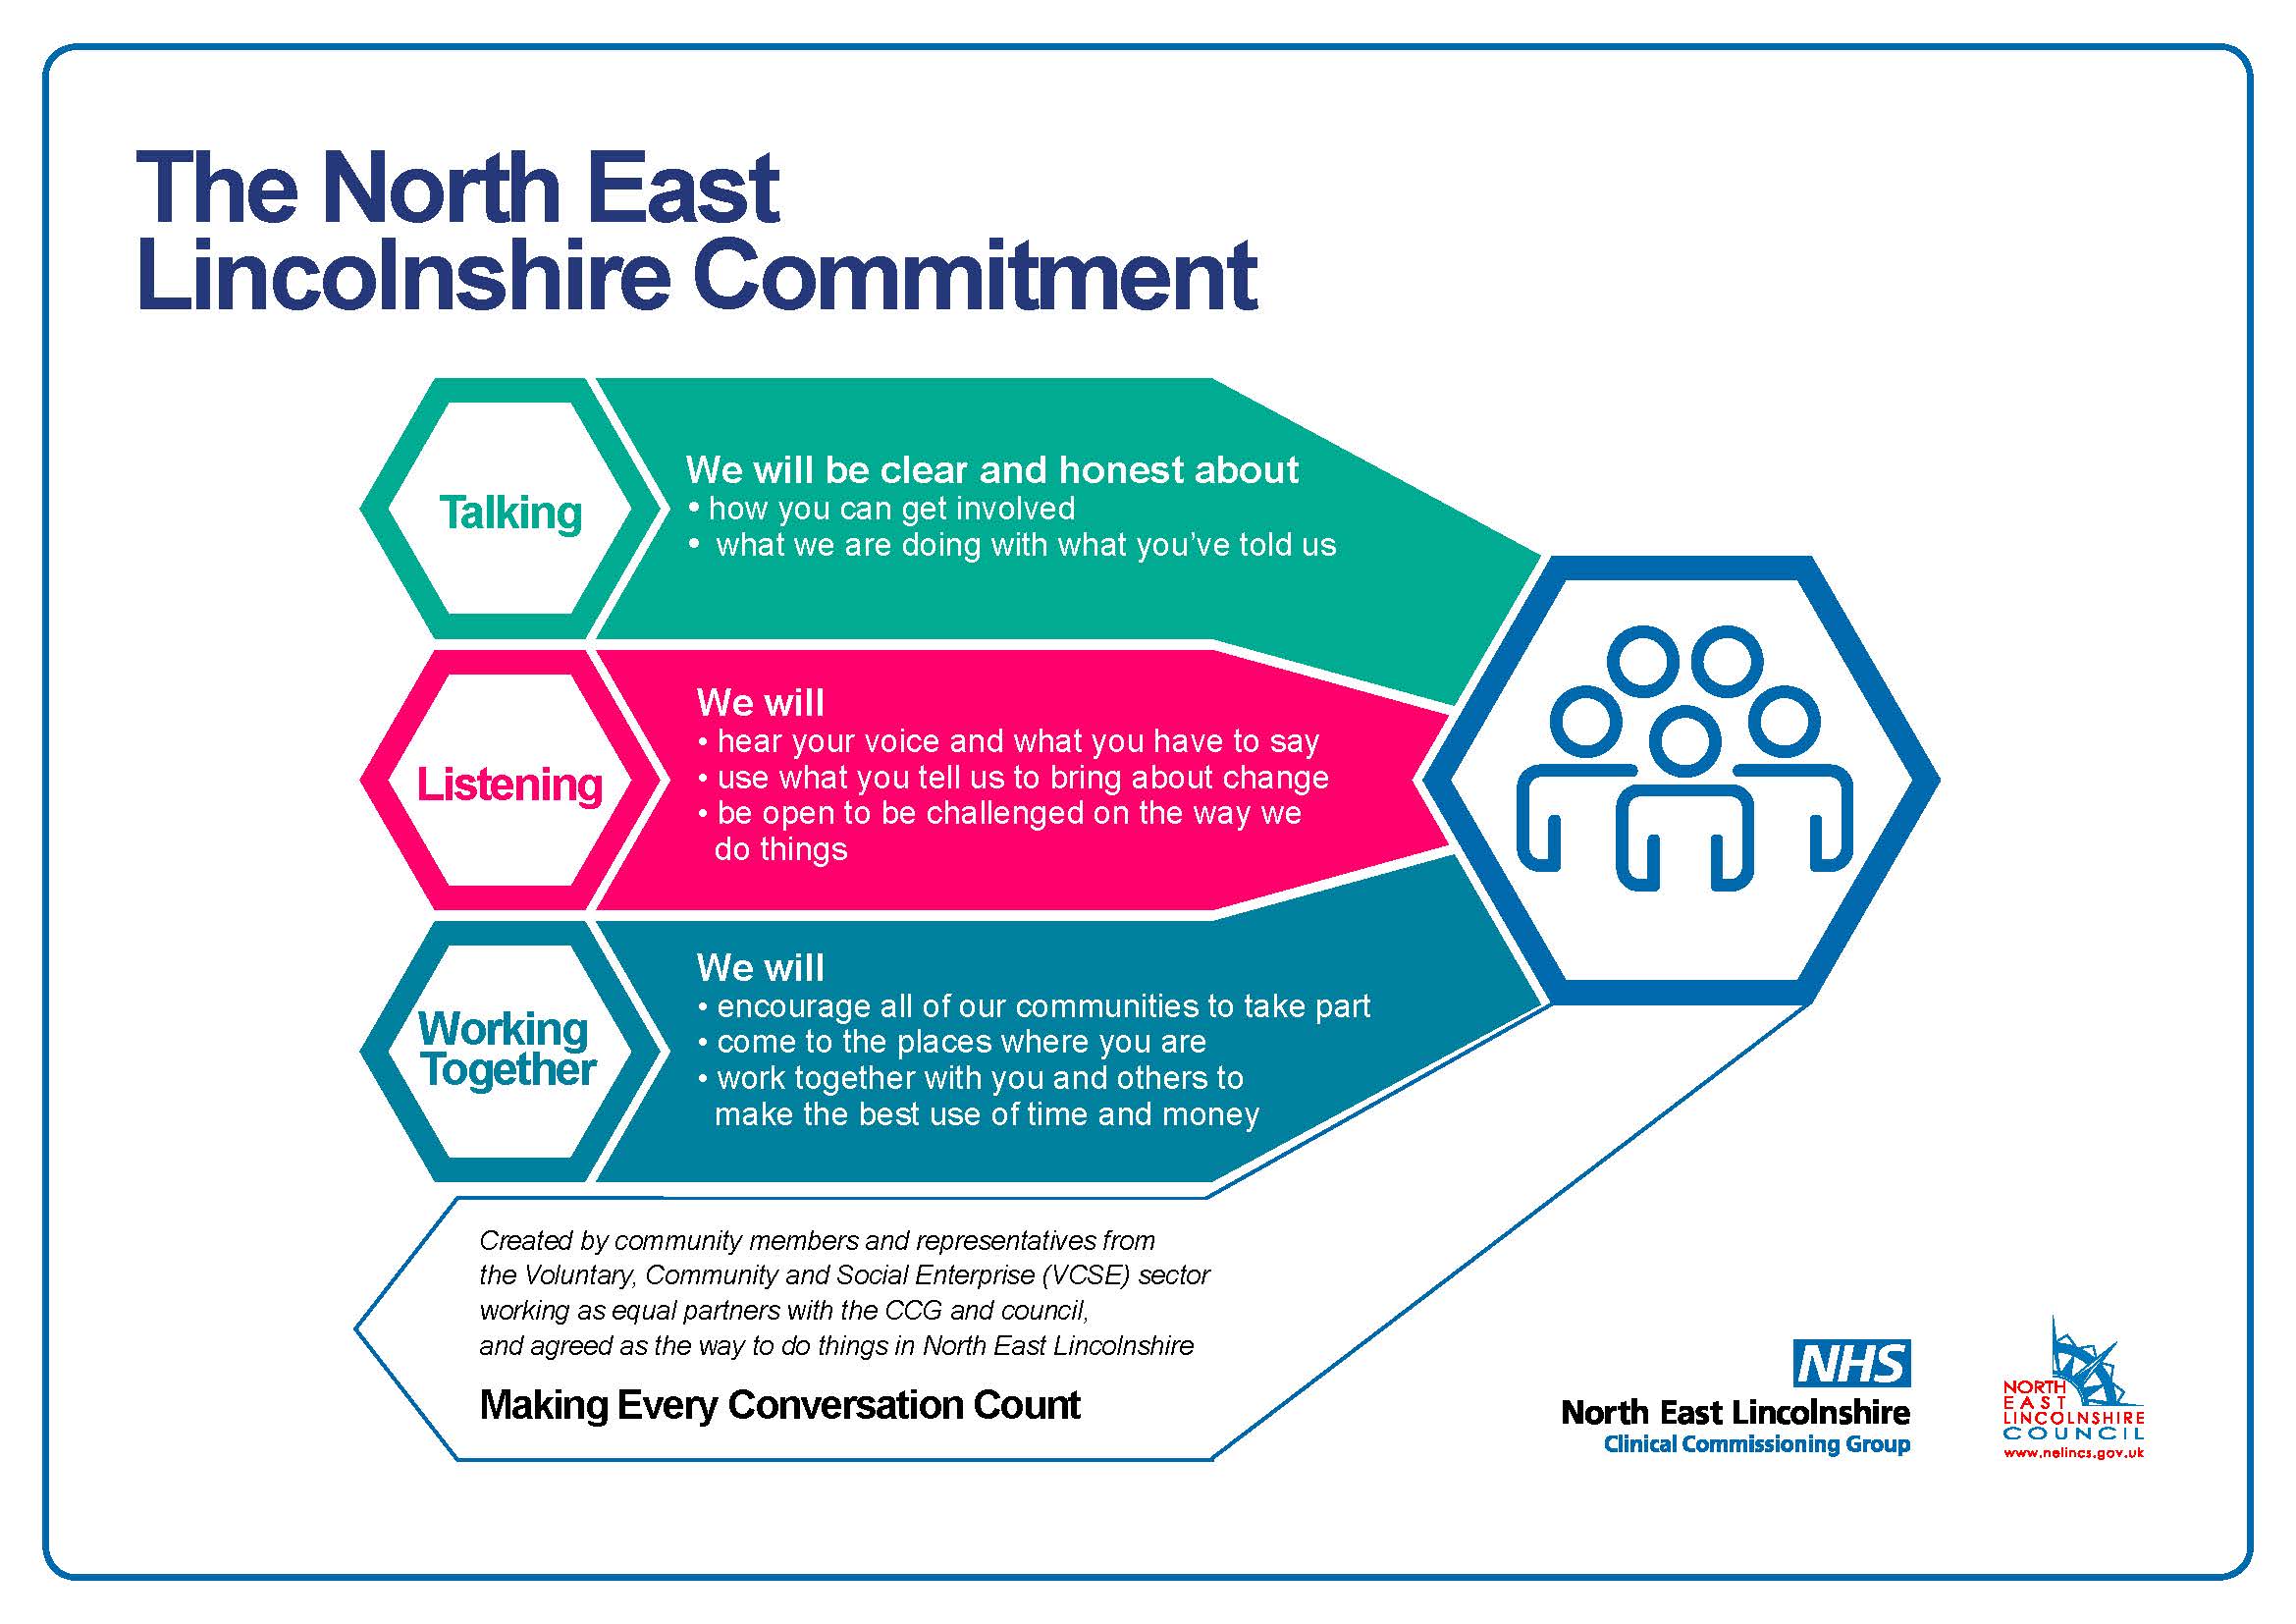 Diagram showing the North East Lincolnshire Commitment to Talking to the public, Listening to their views and working together